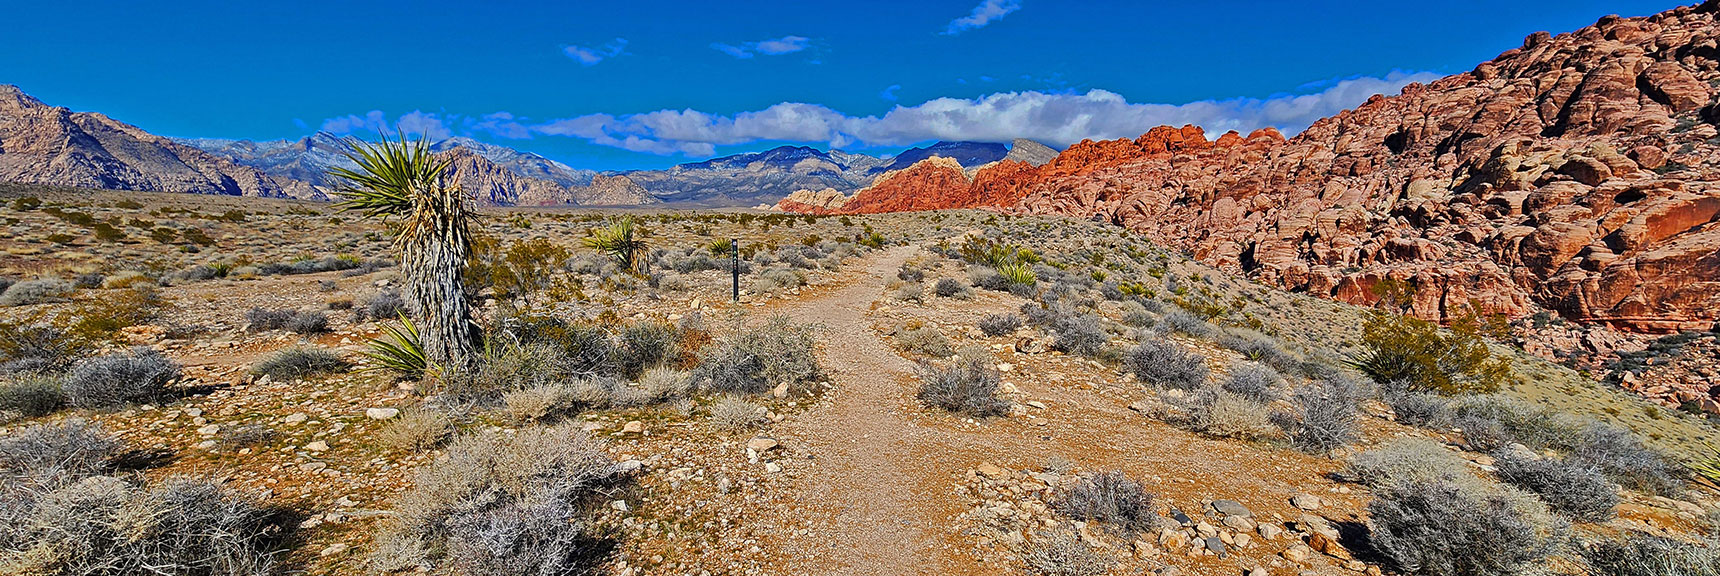 At Southwest Edge of Calico Hills (Grand Circle Loop Sign) Make Right Turn Descent into Canyon | Calico Basin Daily Workout Trails | Calico Basin, Nevada